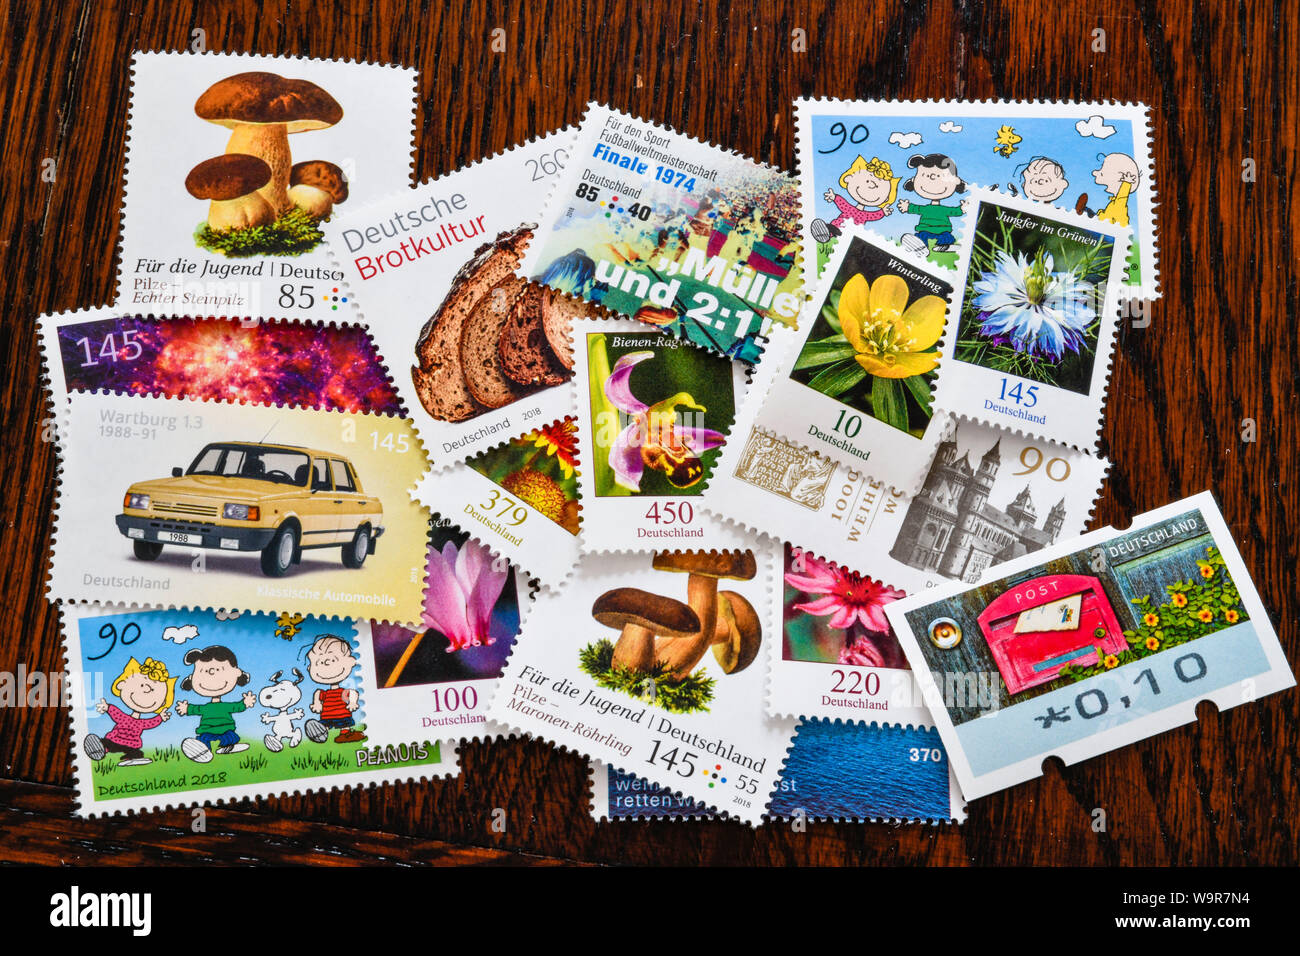 German postage stamps Stock Photo